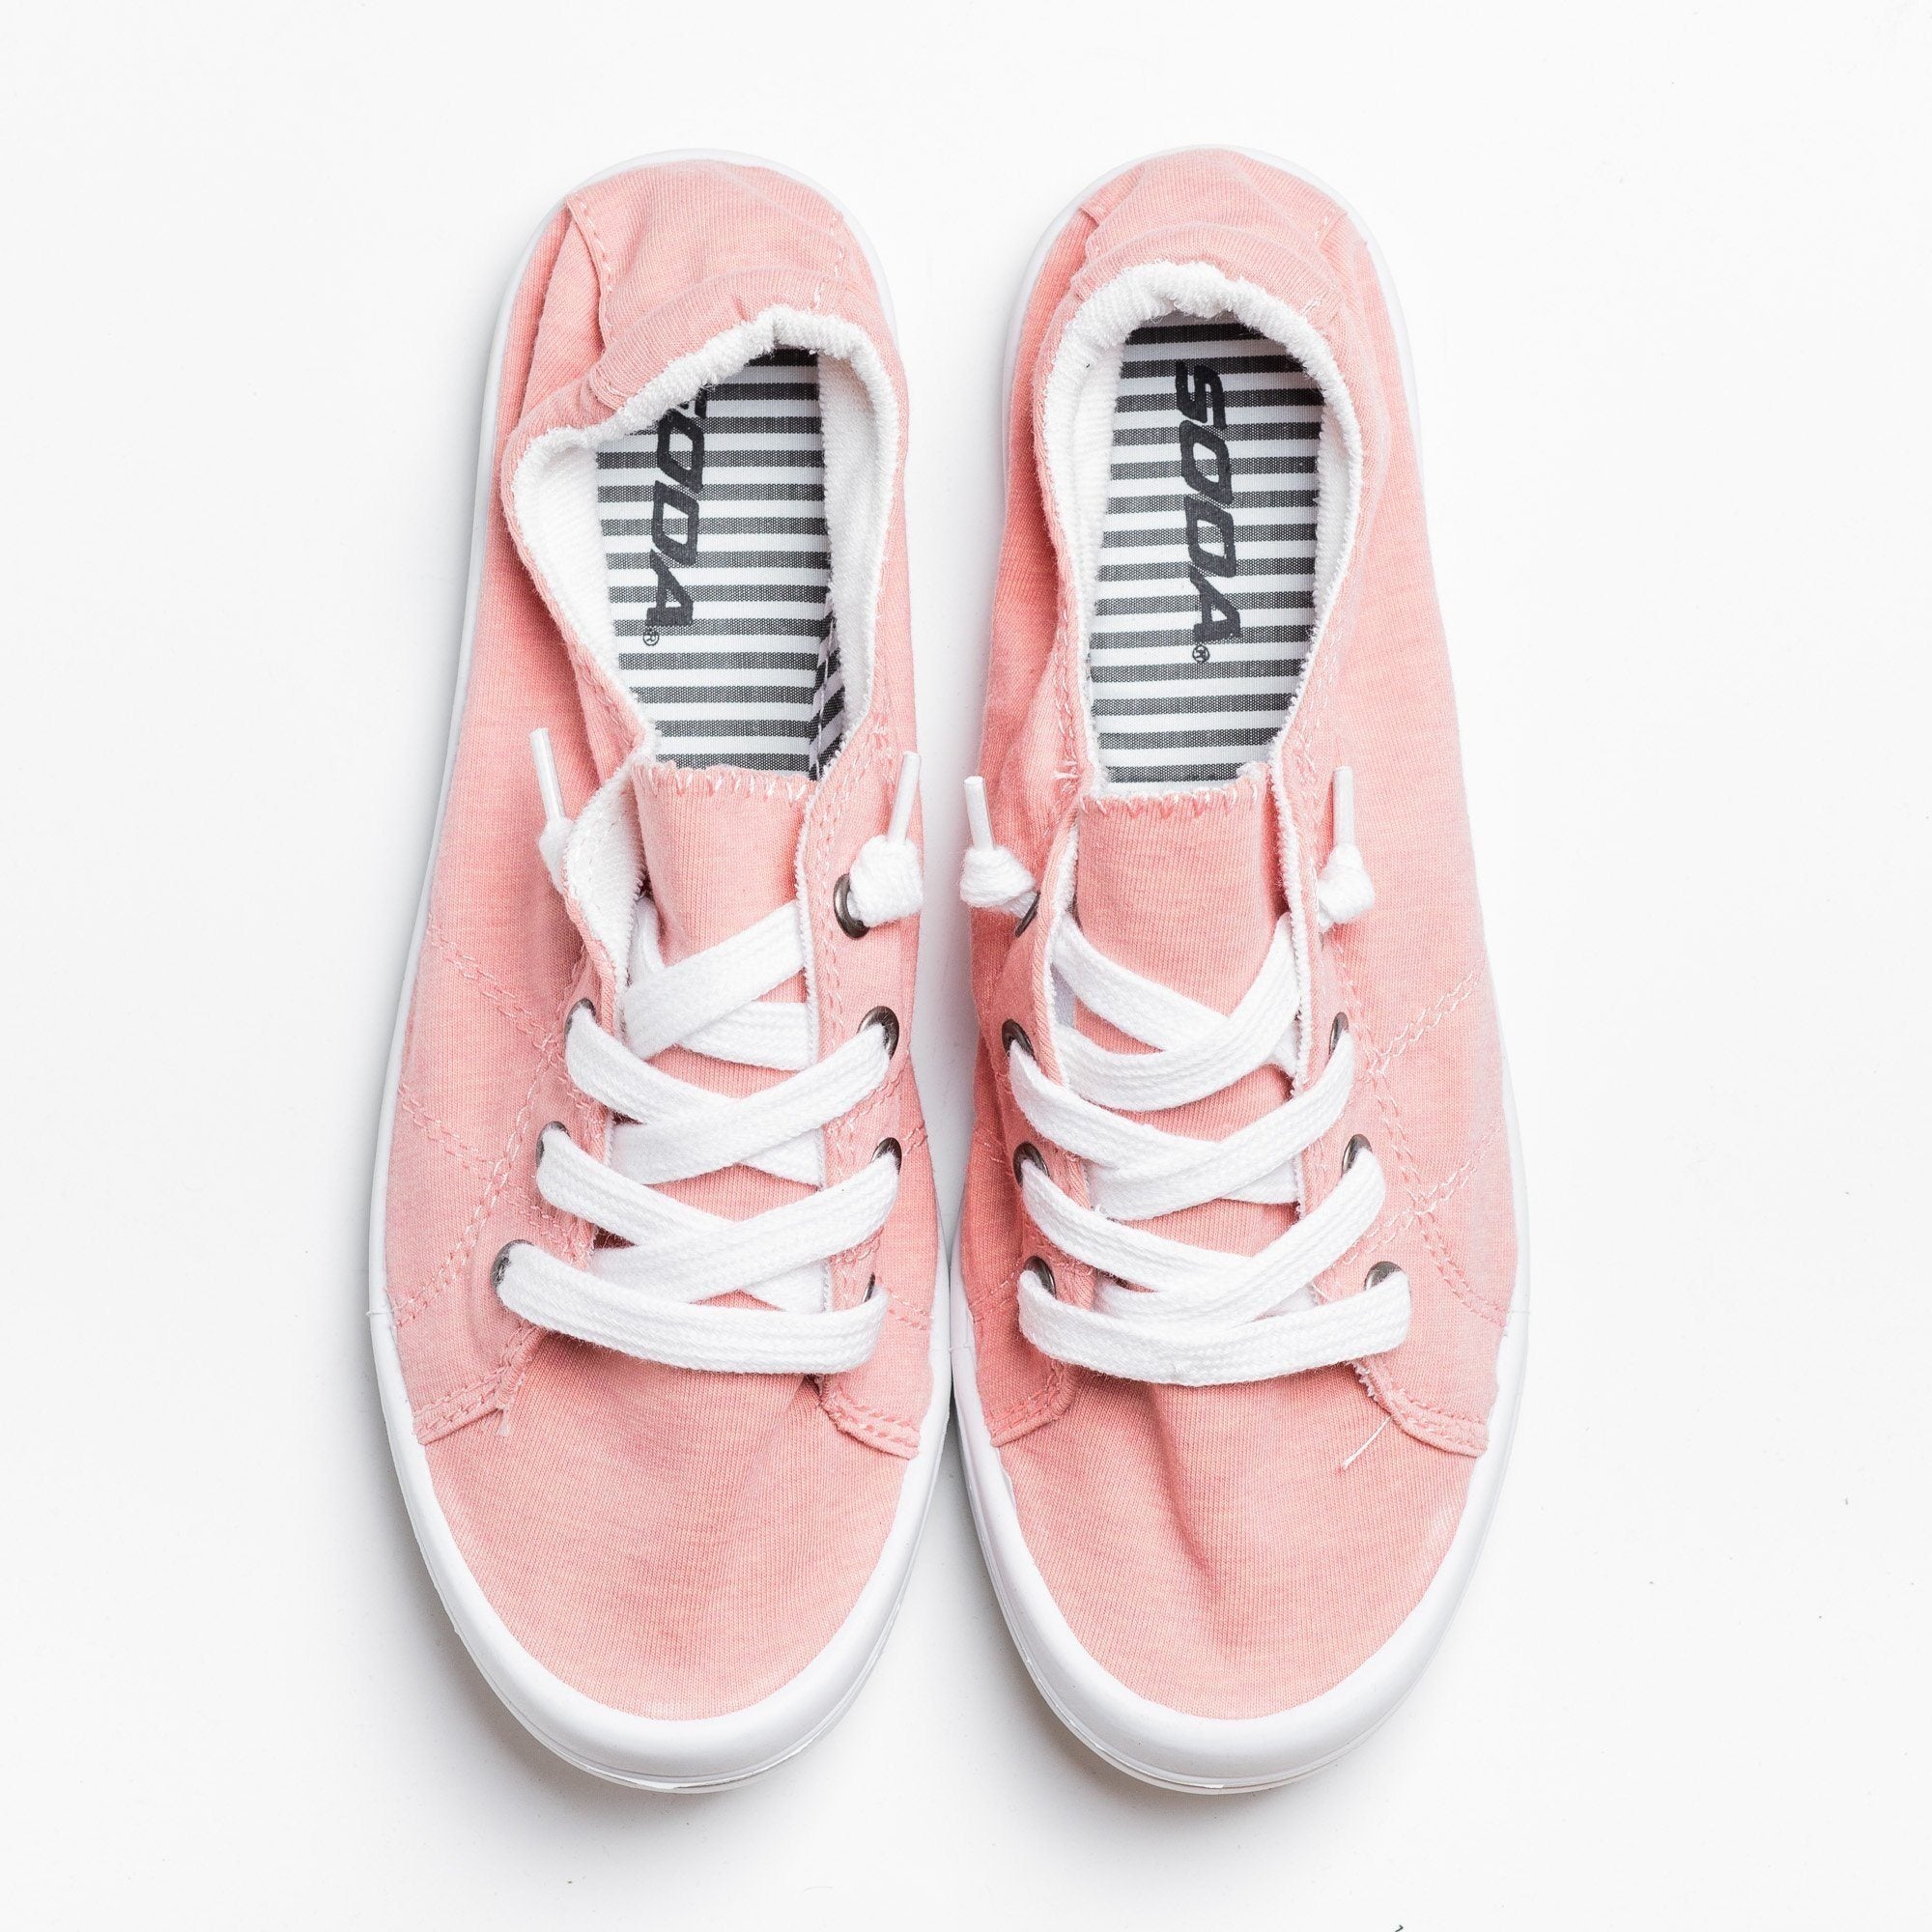 pink soda shoes